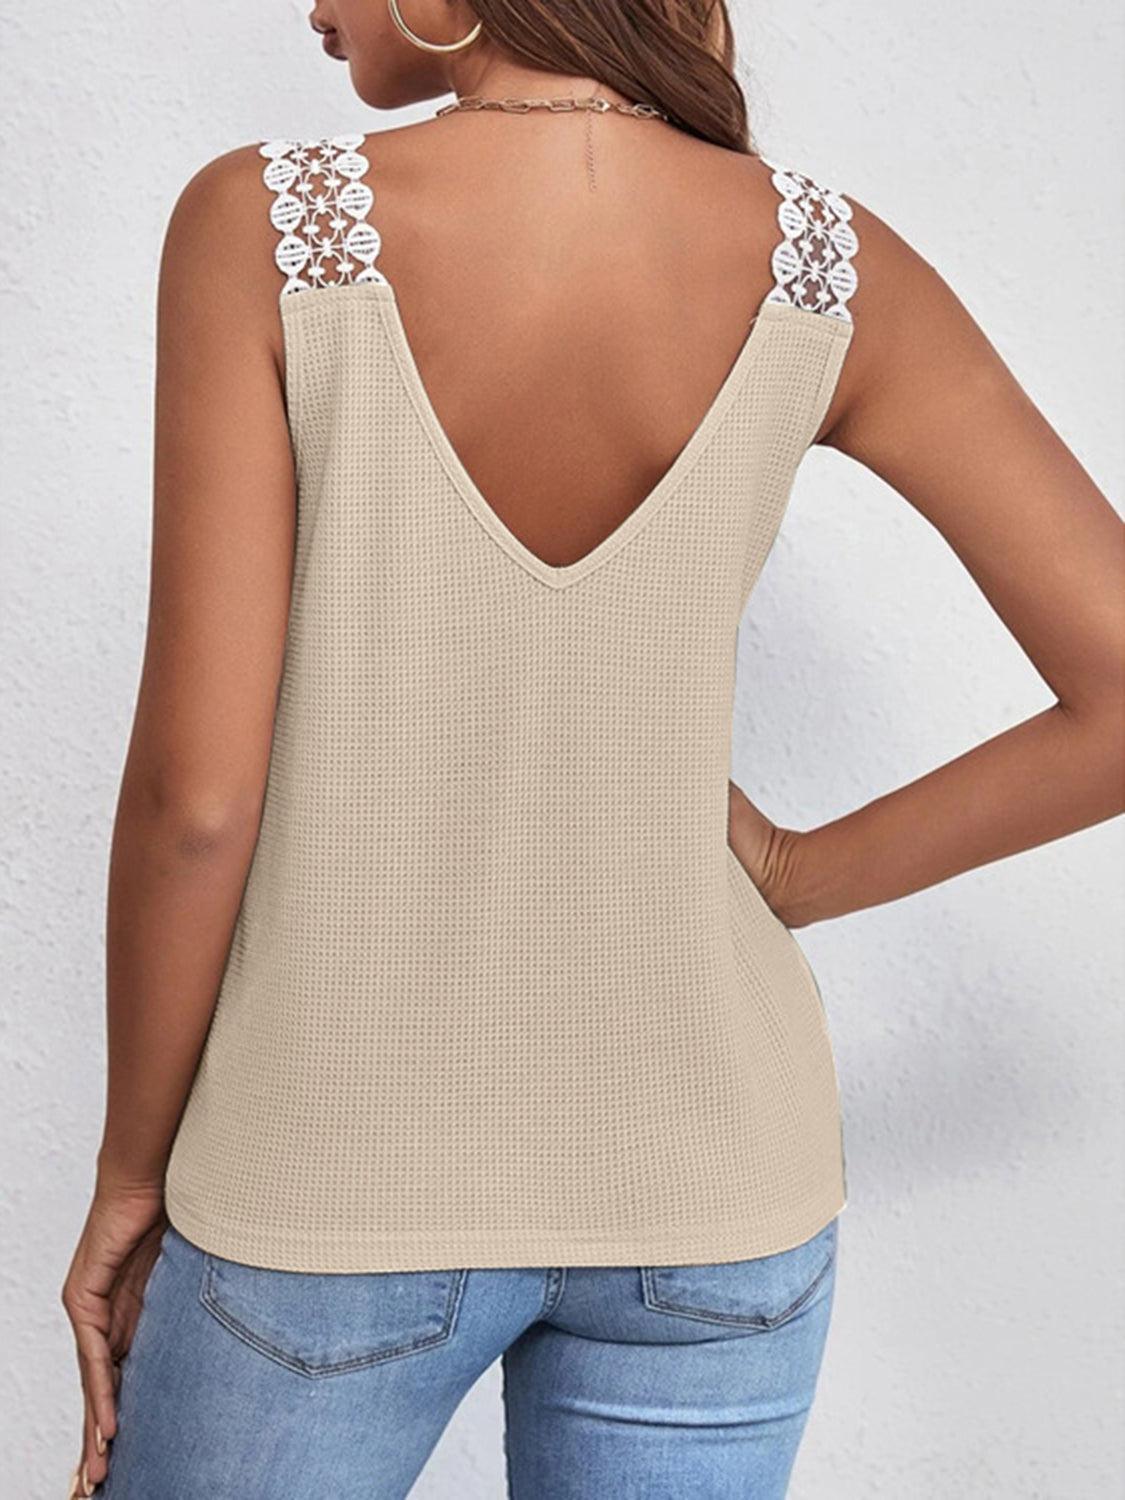 a woman wearing a tan tank top with a lace back